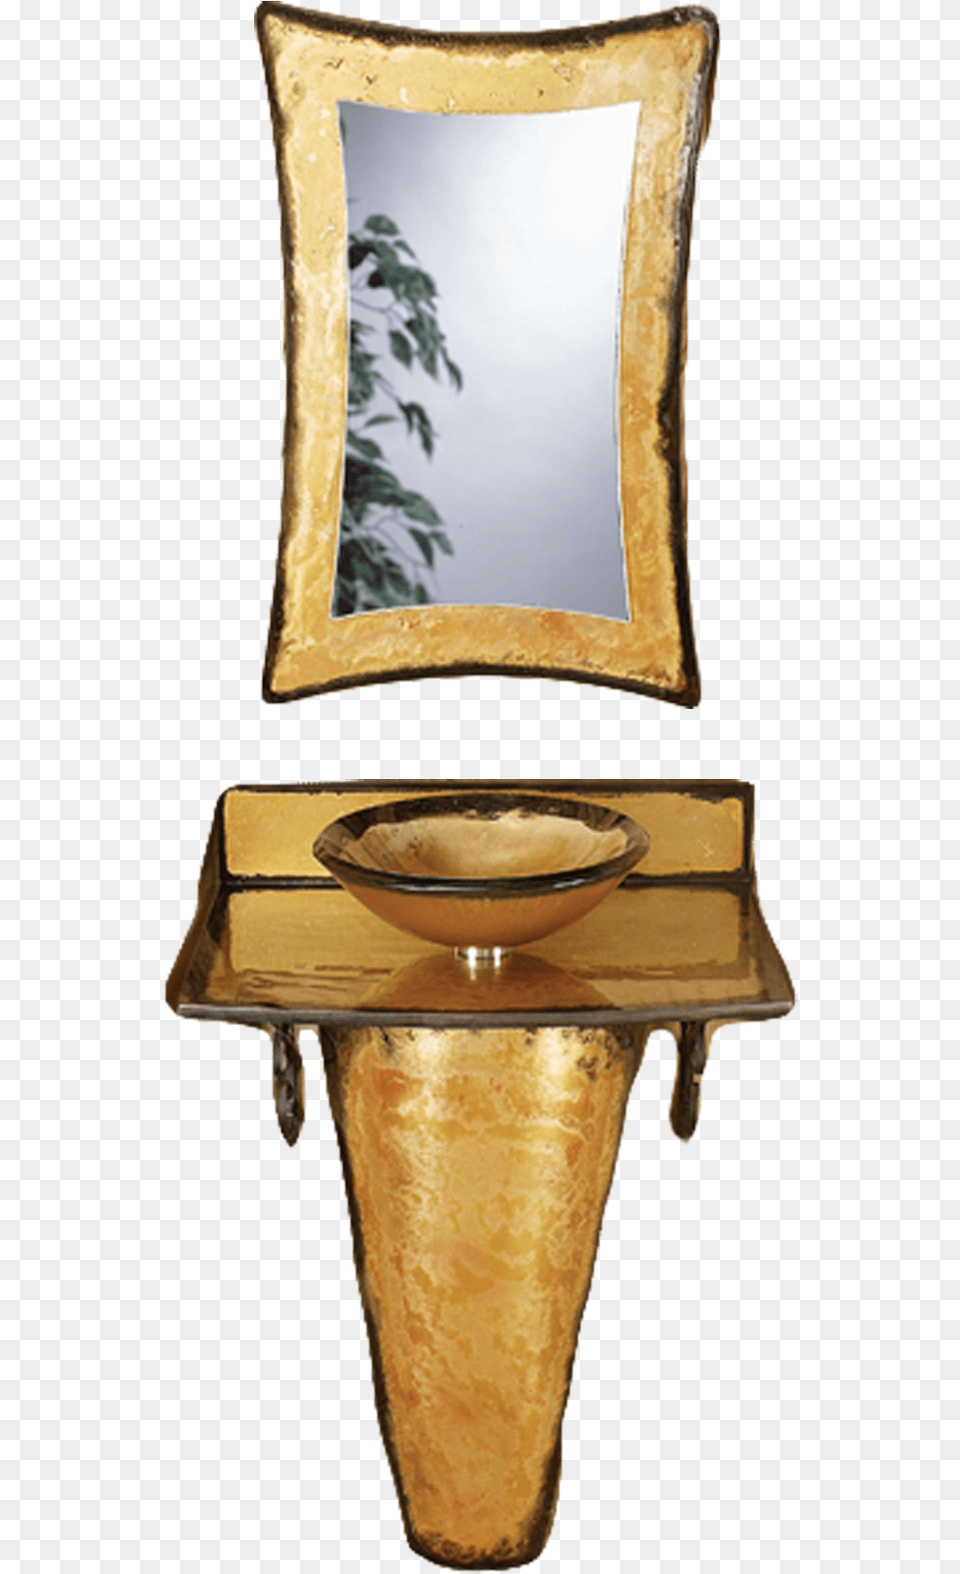 Oro Vior 17 Chair, Mirror, Sink, Sink Faucet Free Png Download